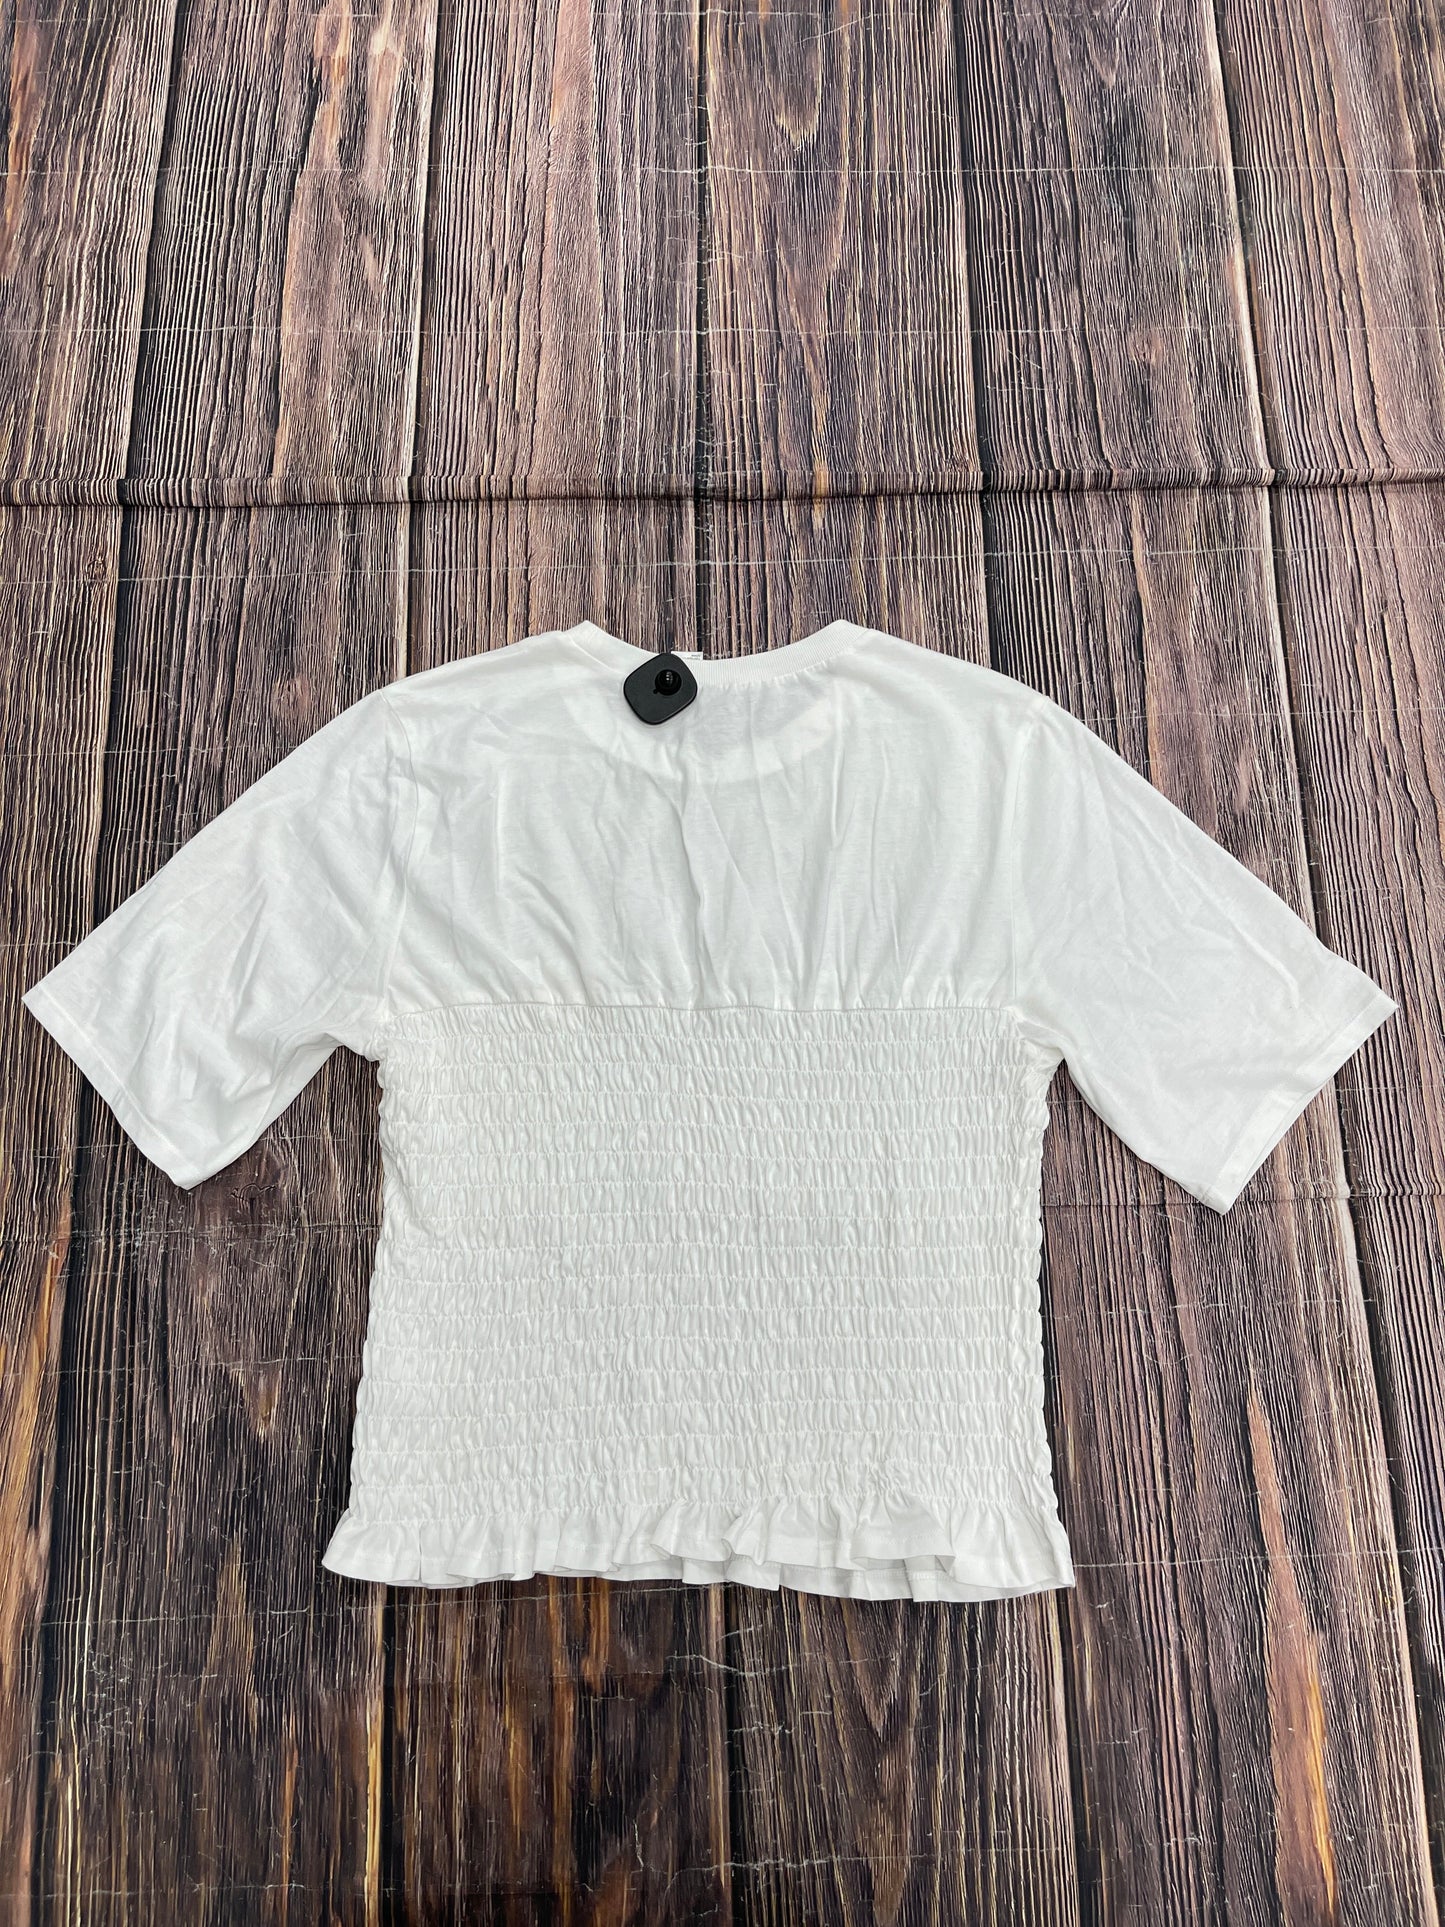 White Top Short Sleeve Divided, Size Xl